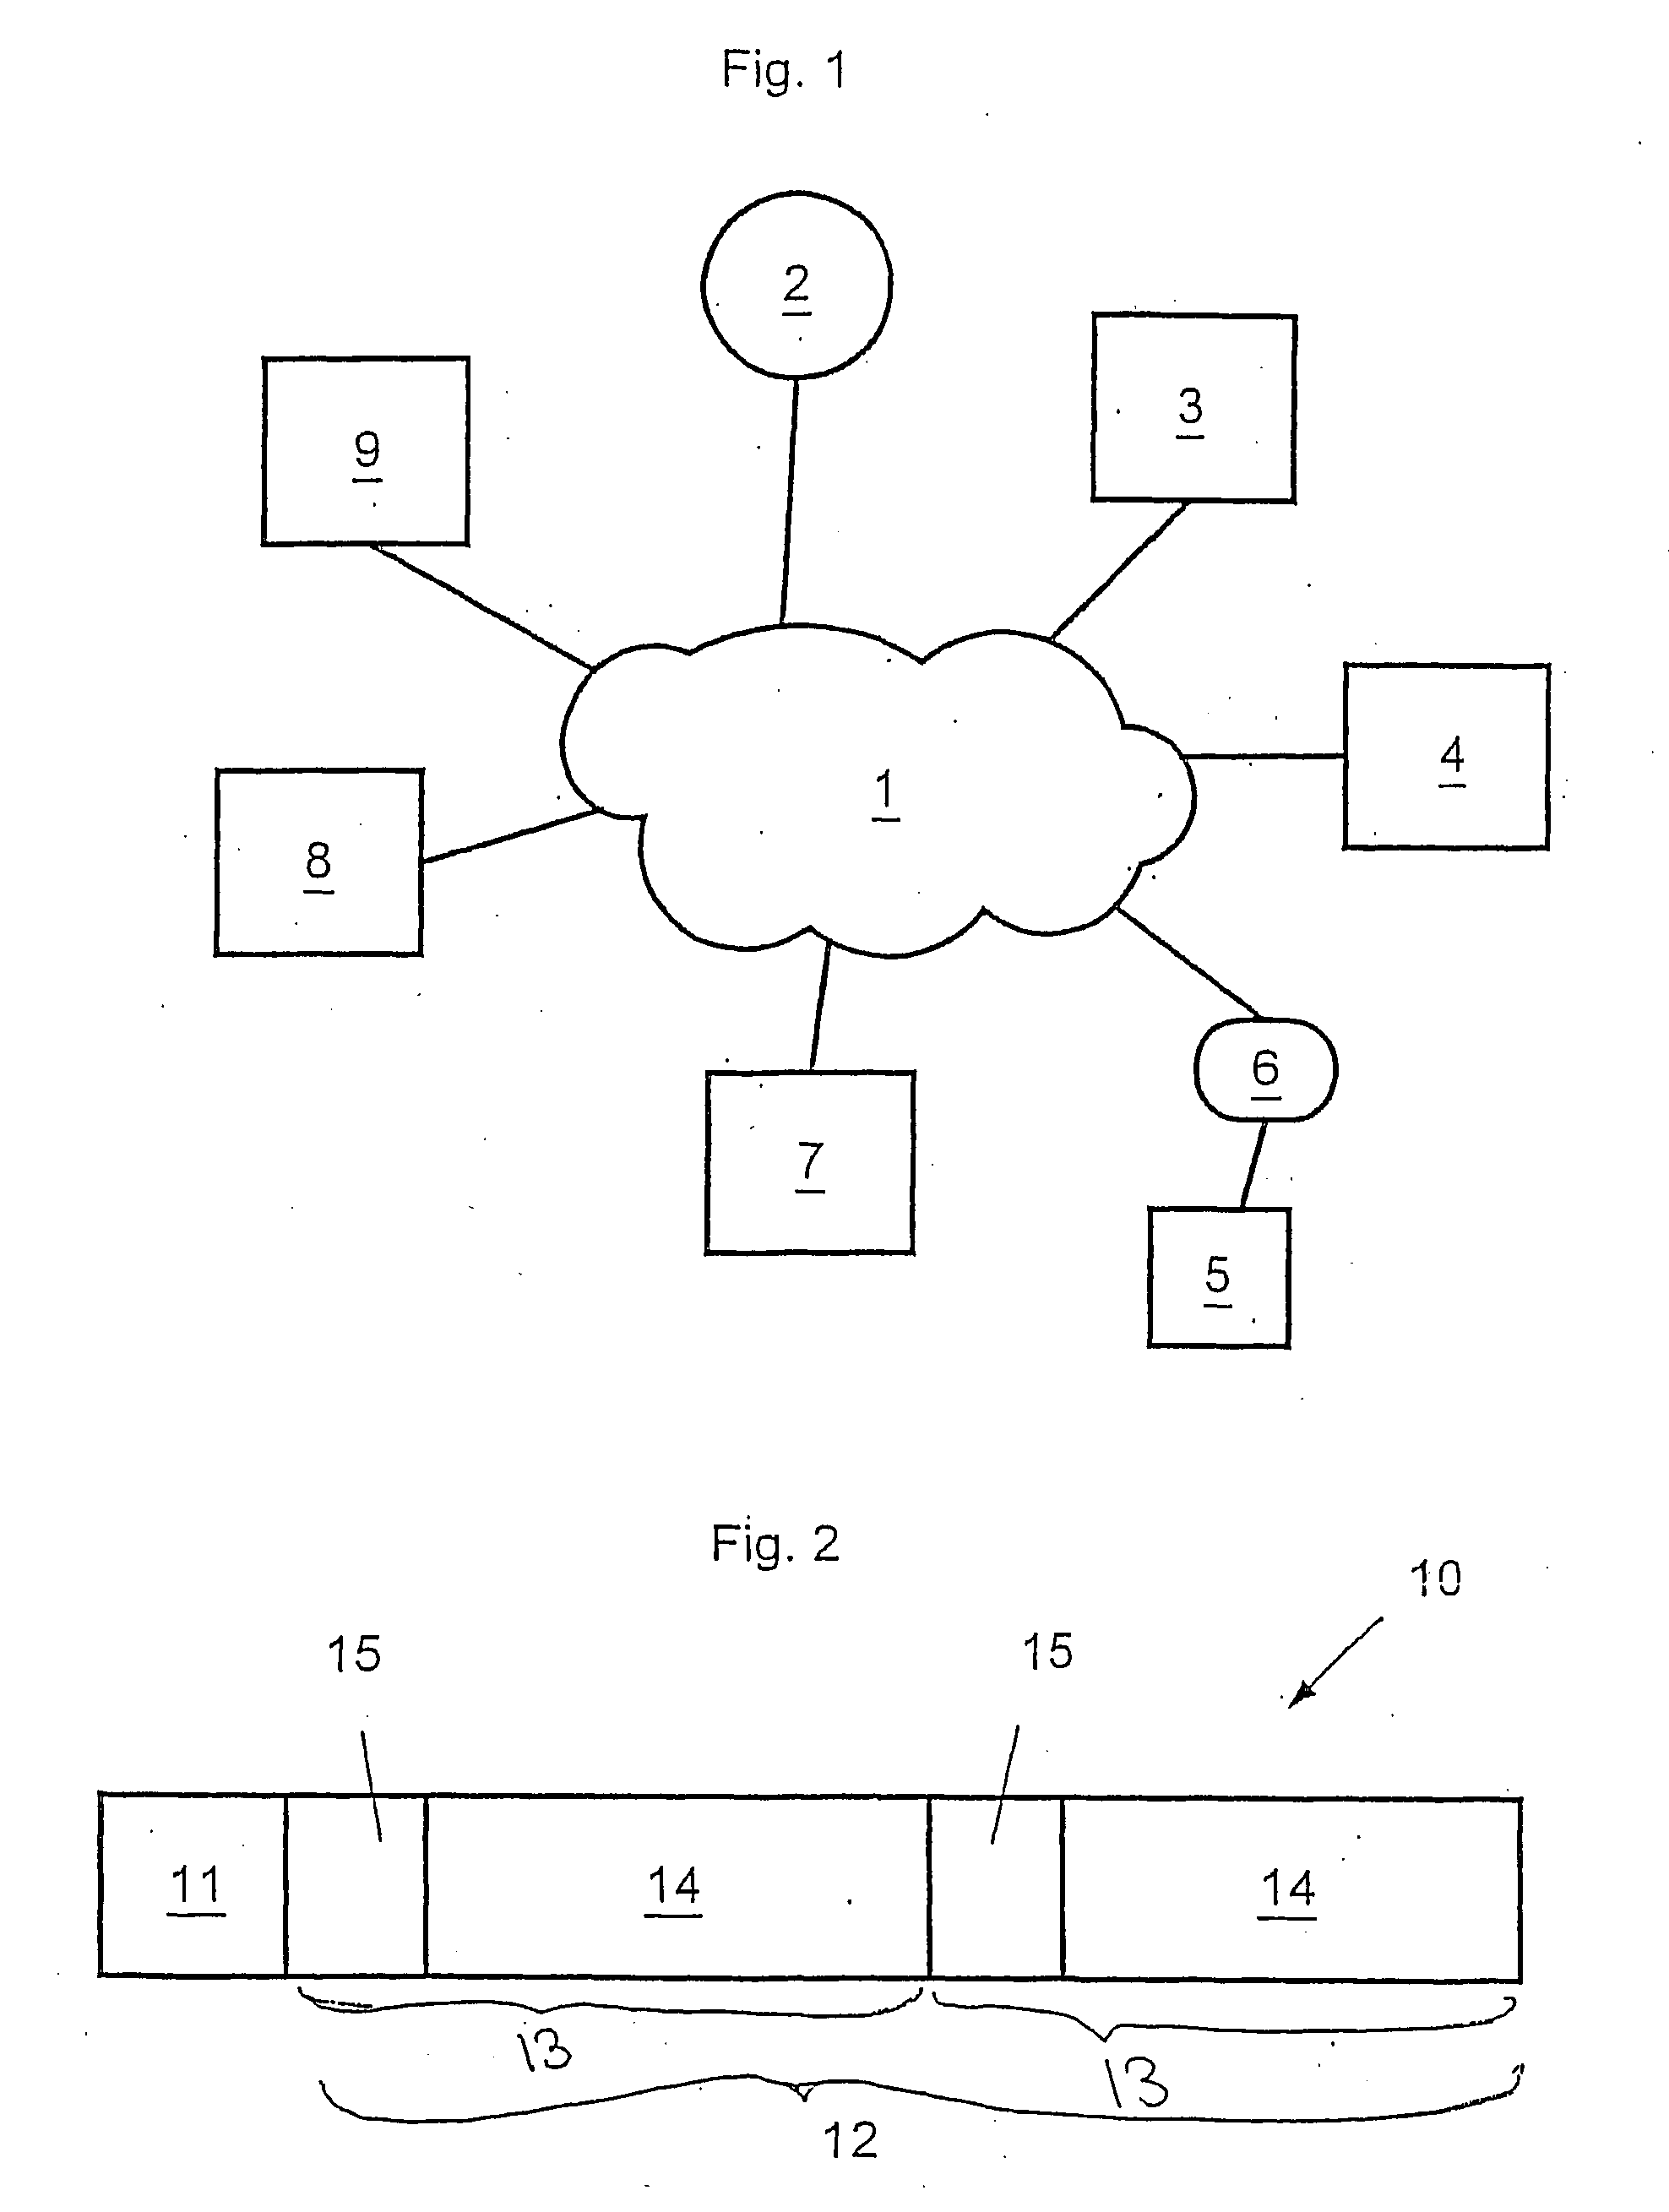 Server for mapping application names to tag values in distributed multi-user application